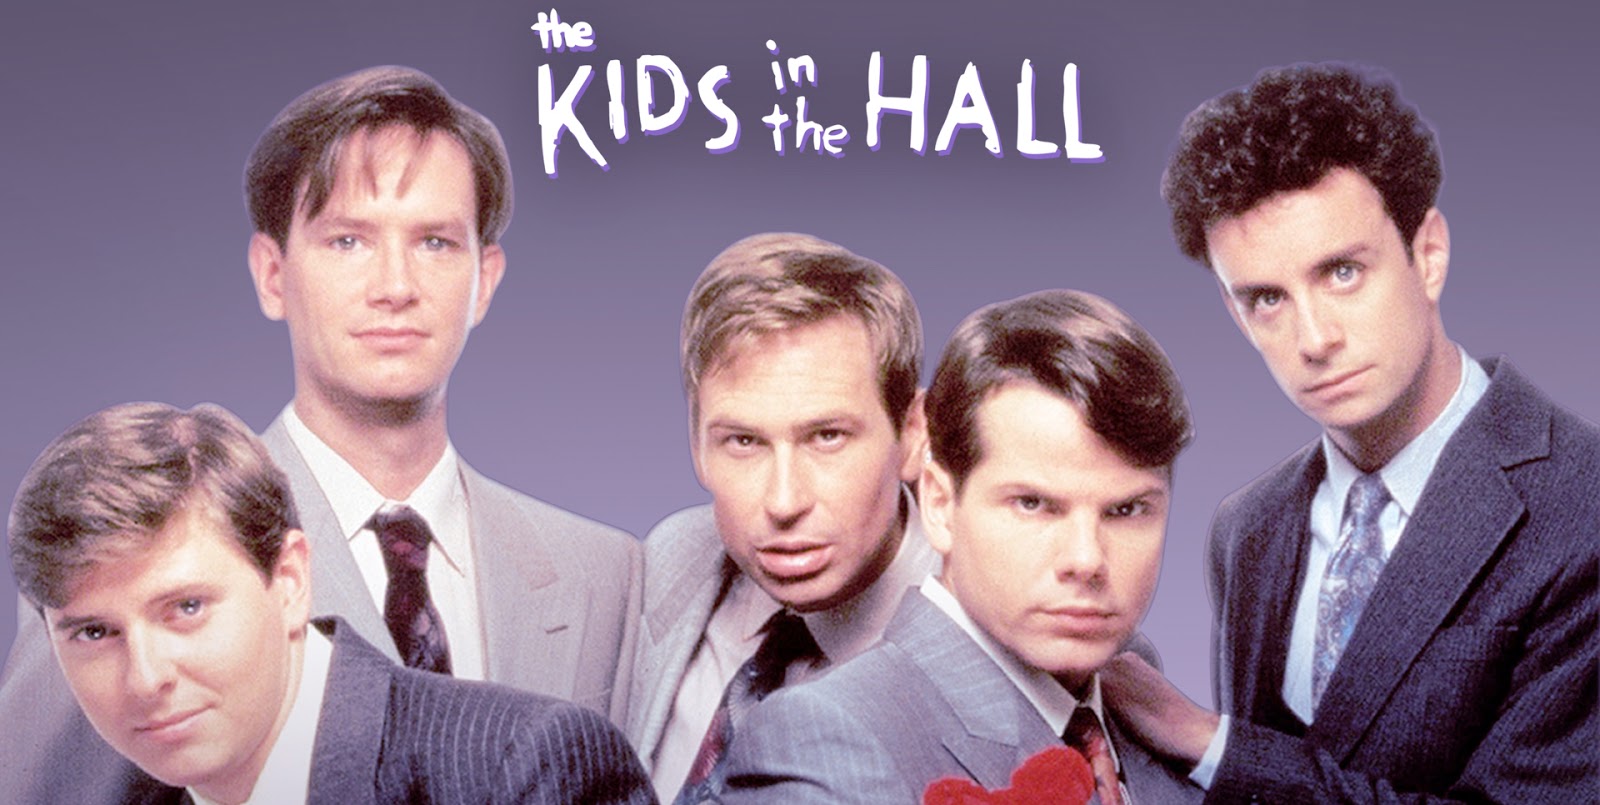 Who in the hall. The Kids in the Hall. Mark MCKINNEY the Kids in the Hall. Hall Kids группа.